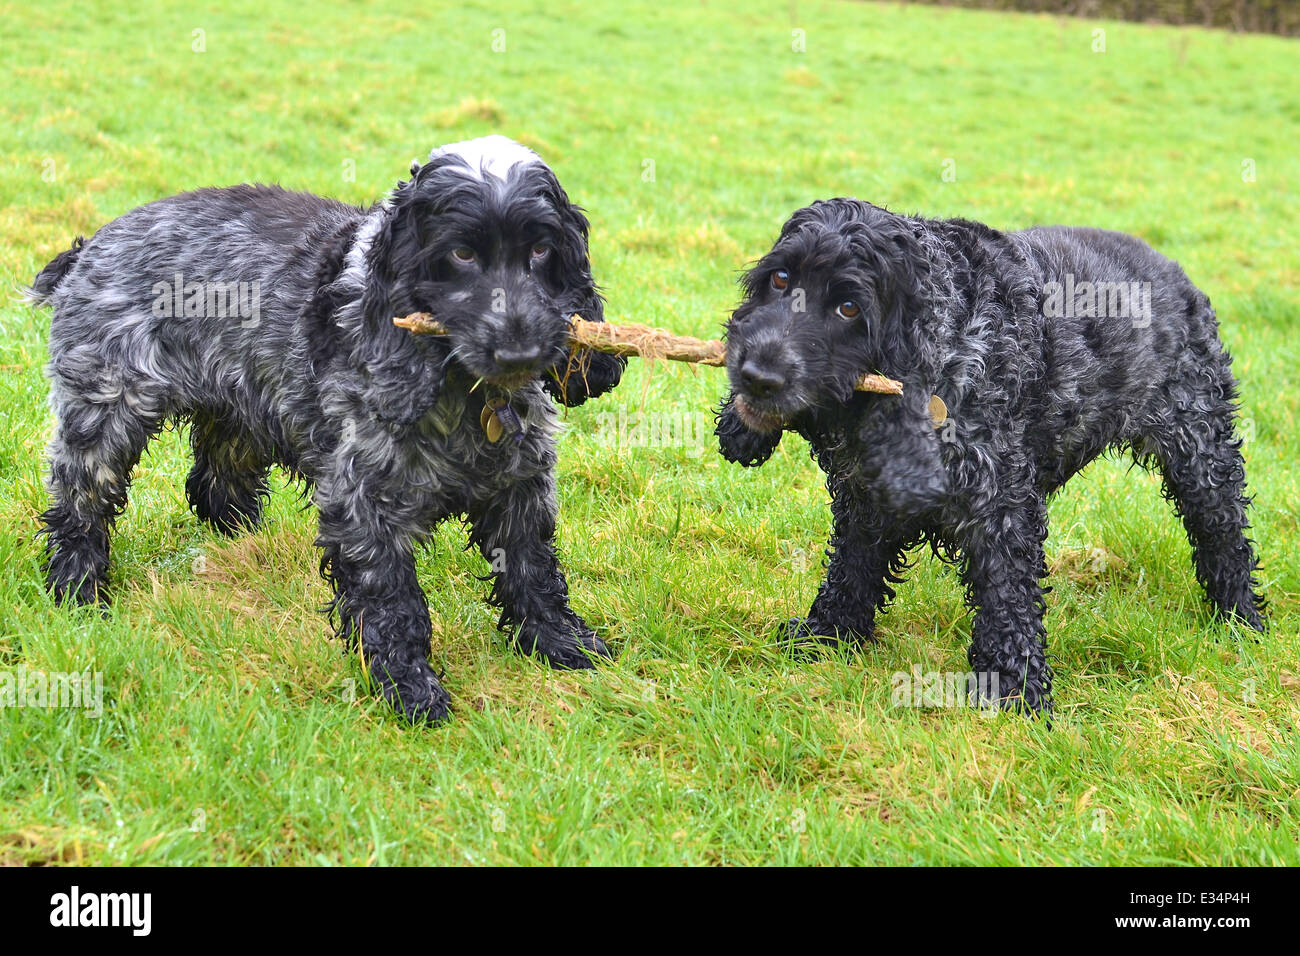 Two English cocker spaniels having a tug of war with a stick in a grassy field. Stock Photo